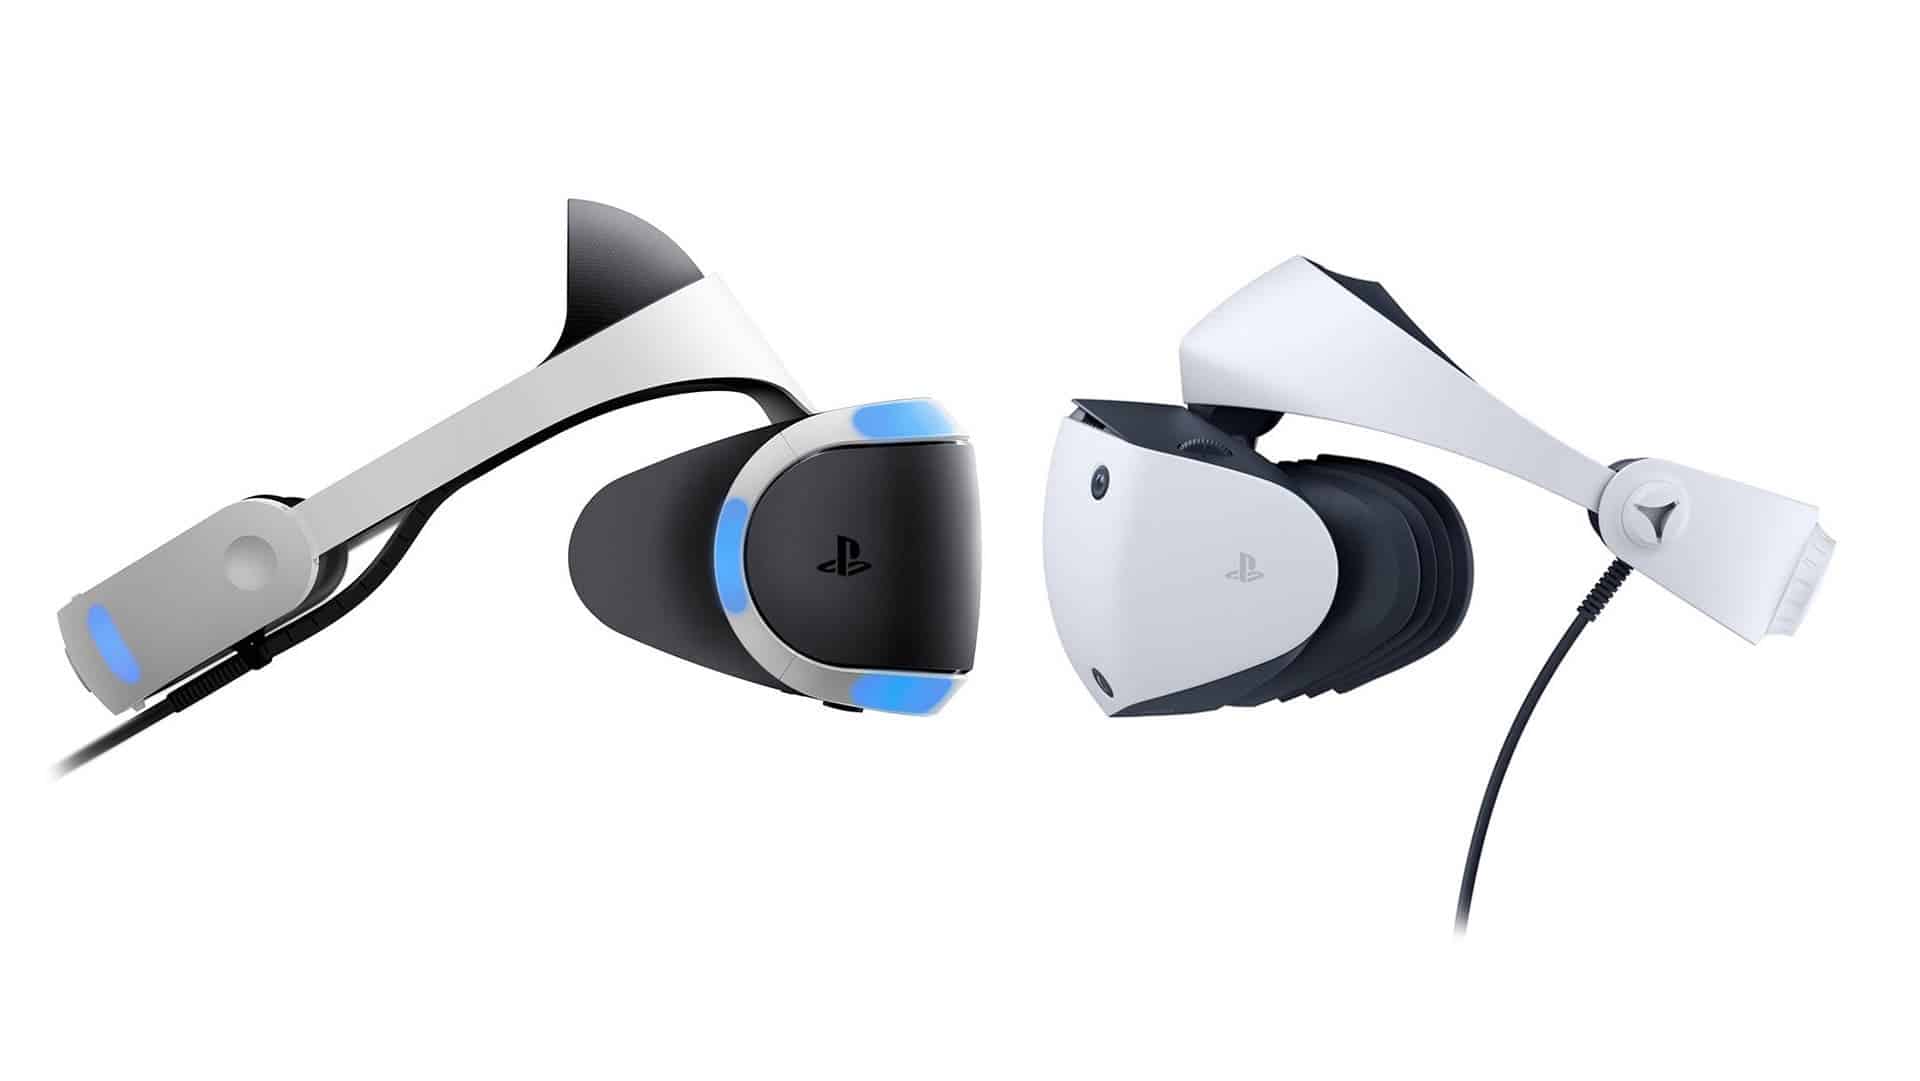 psvr 1 vs psvr 2 | Sony PS VR2 Dream Dashed: Could Price Cuts Save the Day? | The Paradise